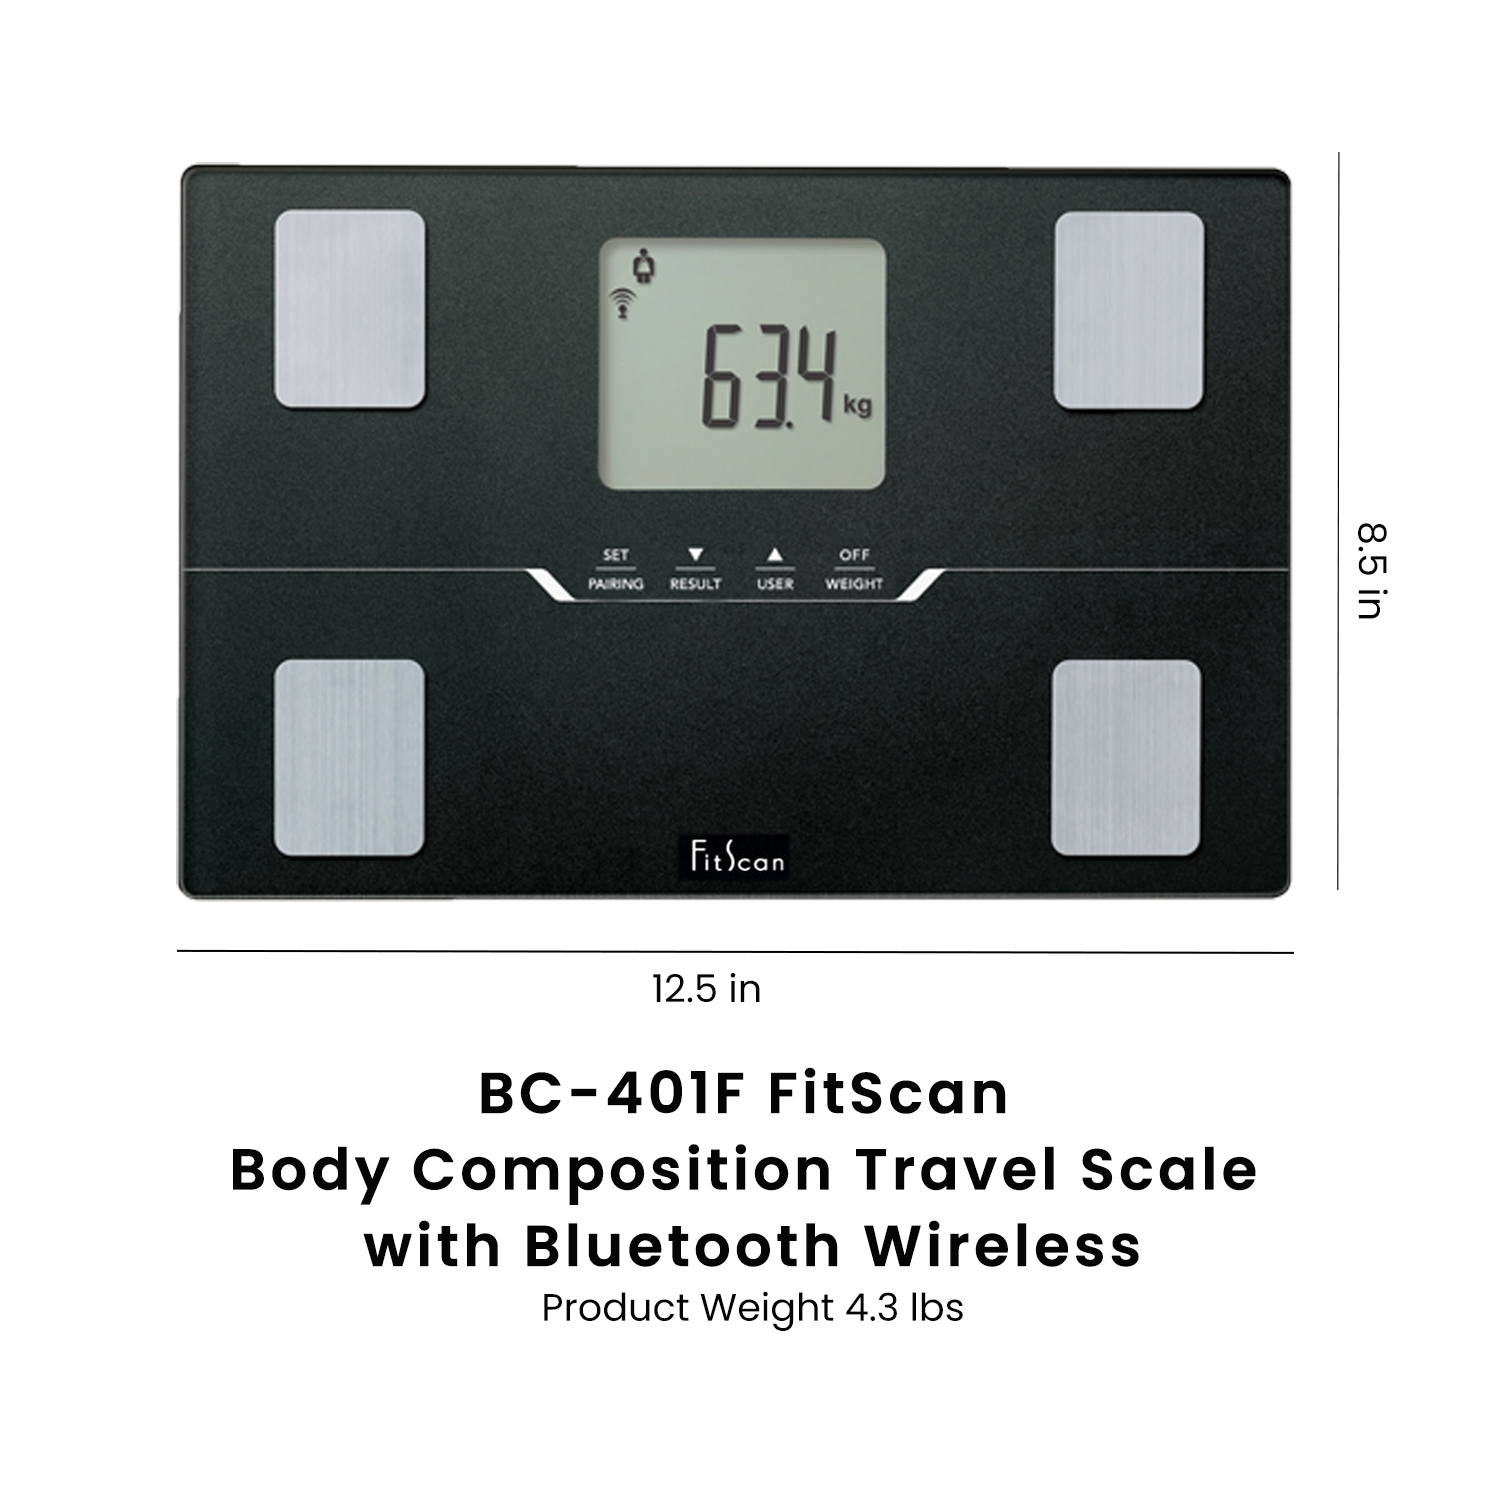 WW Bluetooth Body Analysis Scale Bathroom Scale Review - Consumer